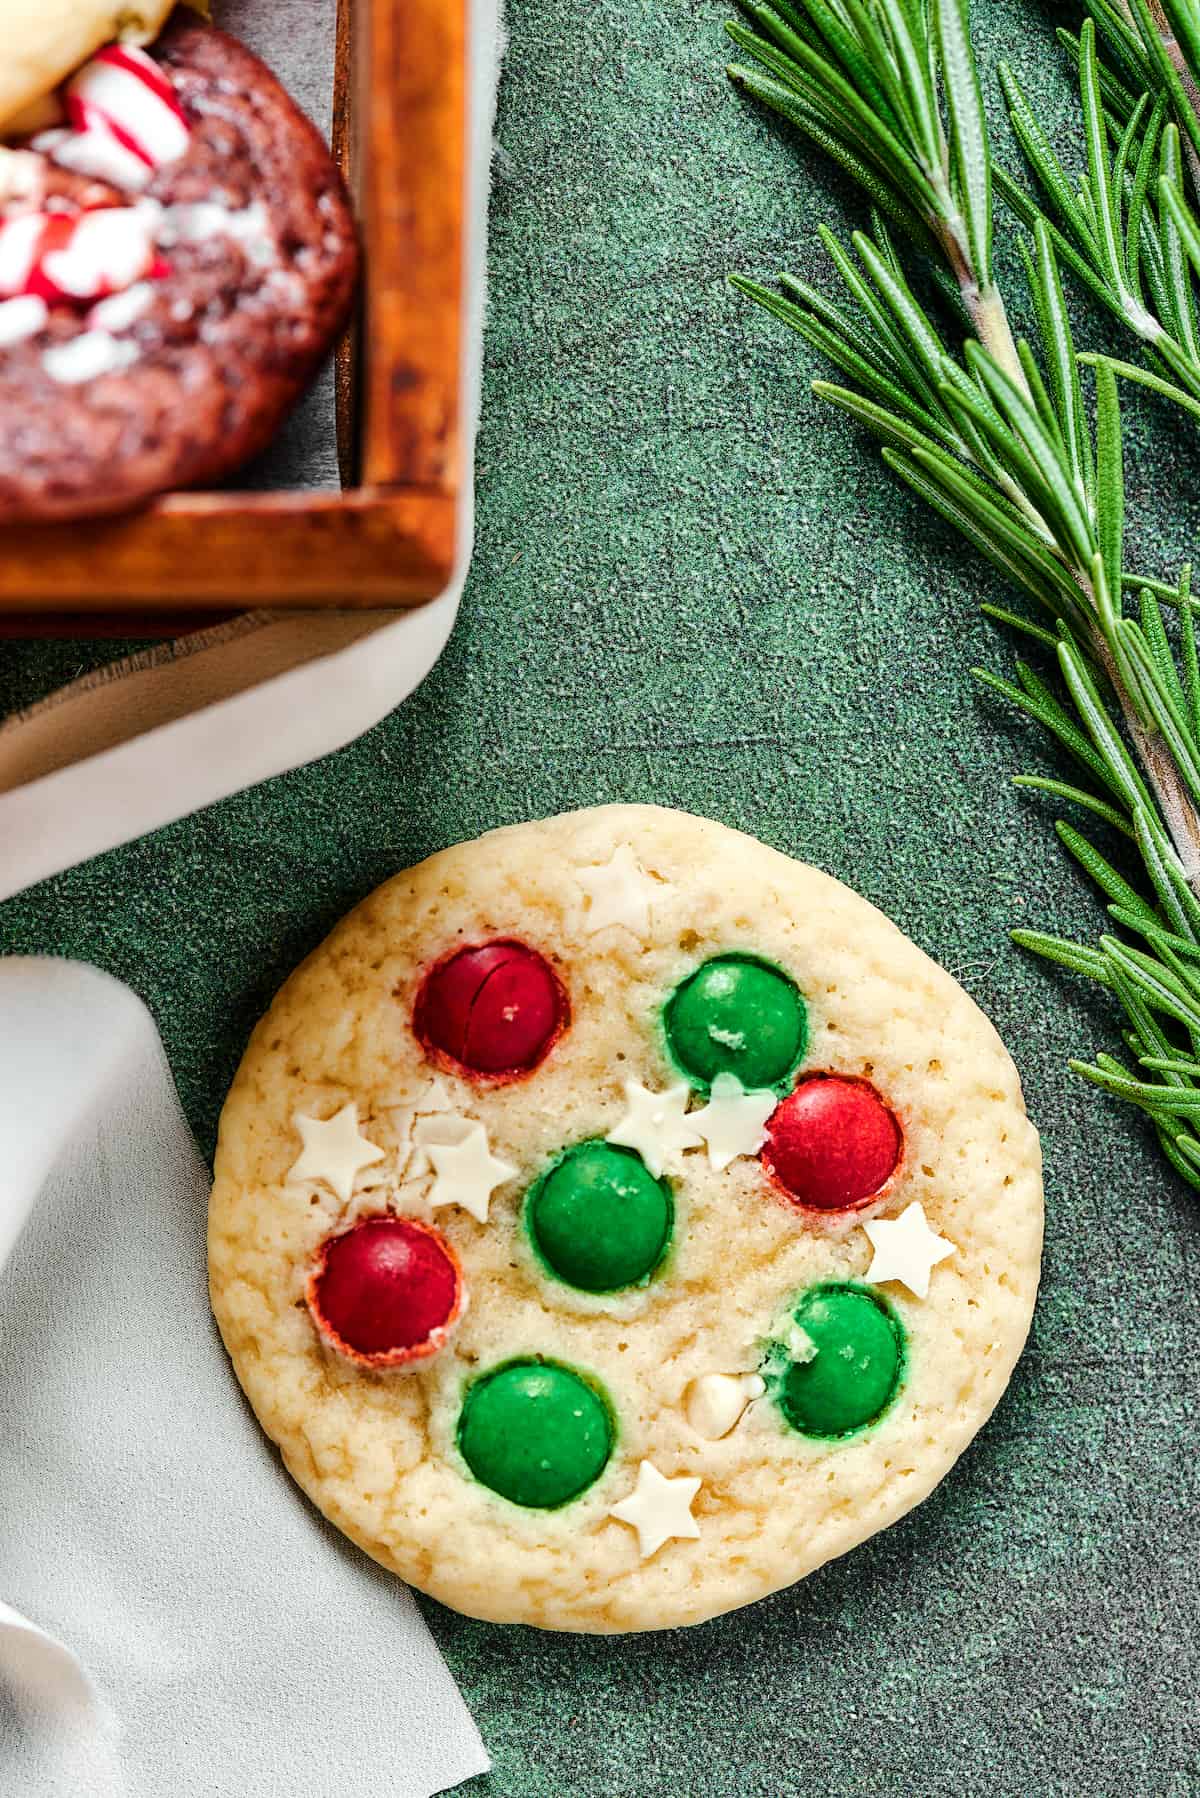 A Christmas sugar cookie decorated with white chocolate stars and M&Ms.